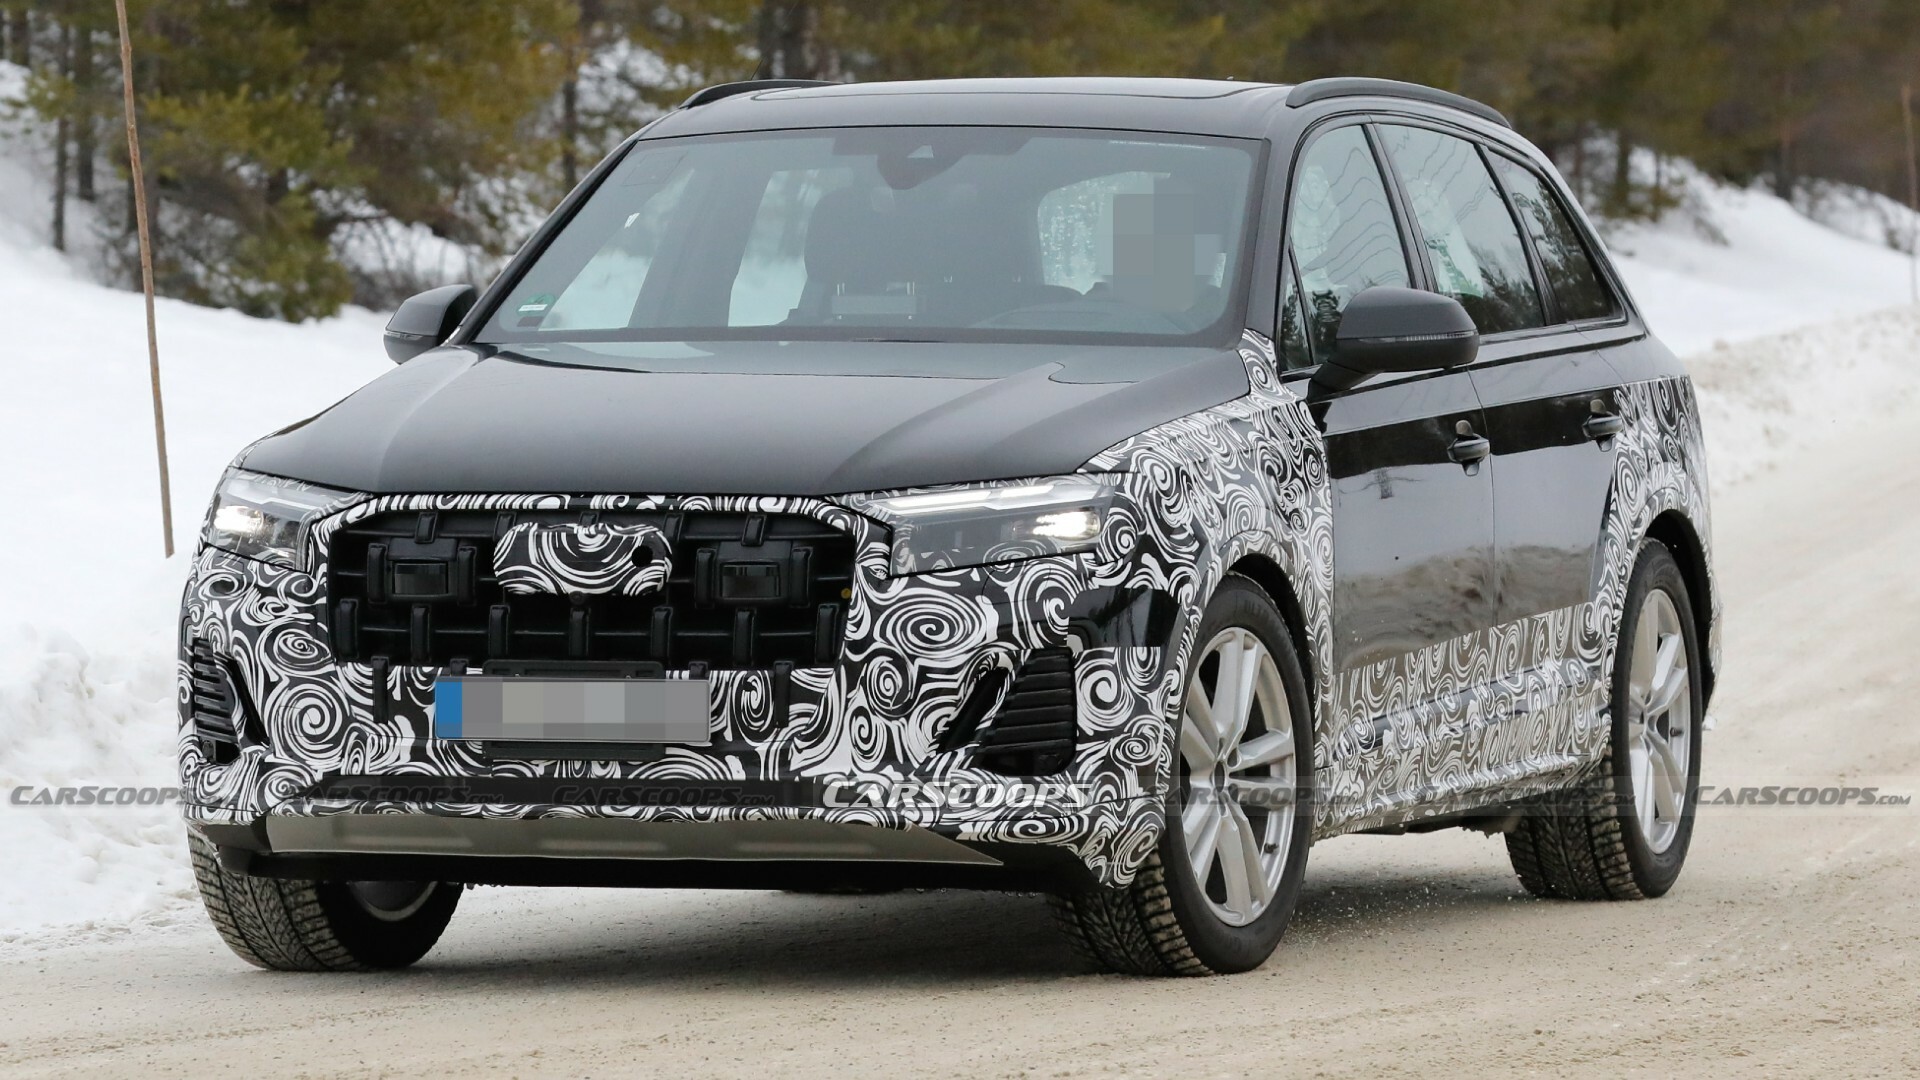 Renowned Audi style keeps the 2023 Q7 as desirable as ever